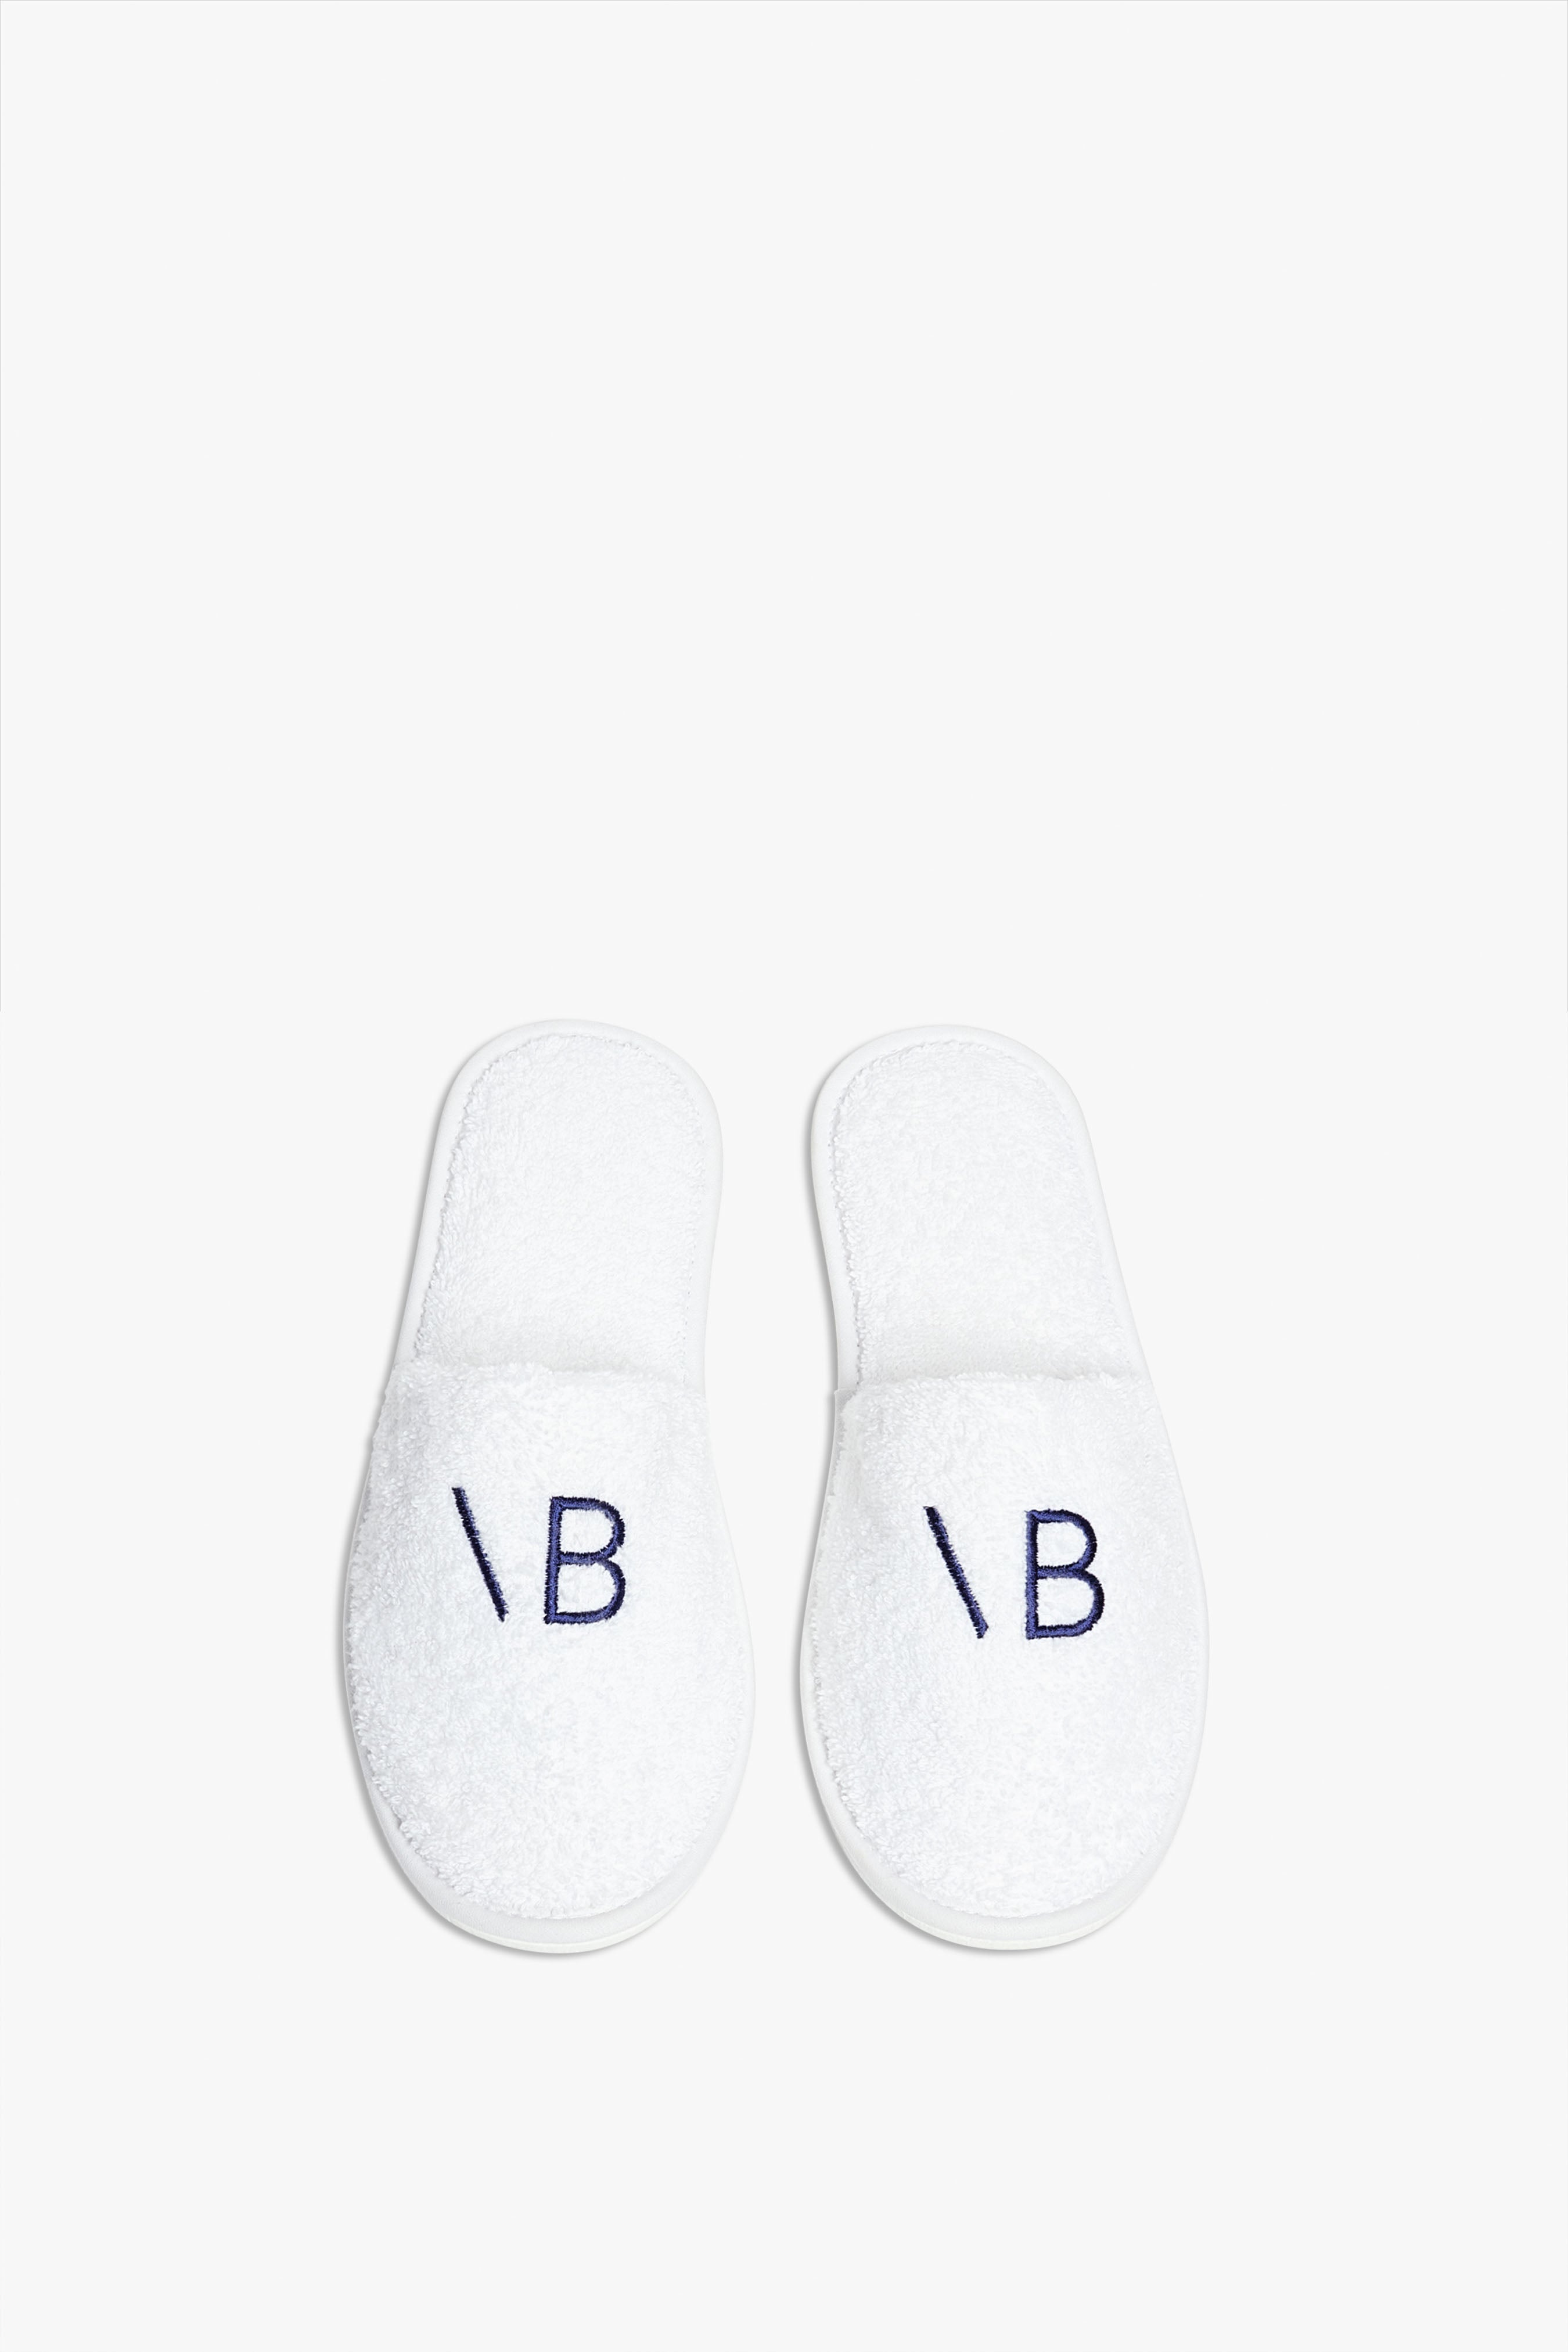 VB Embroidered Slippers in Navy-White - 2